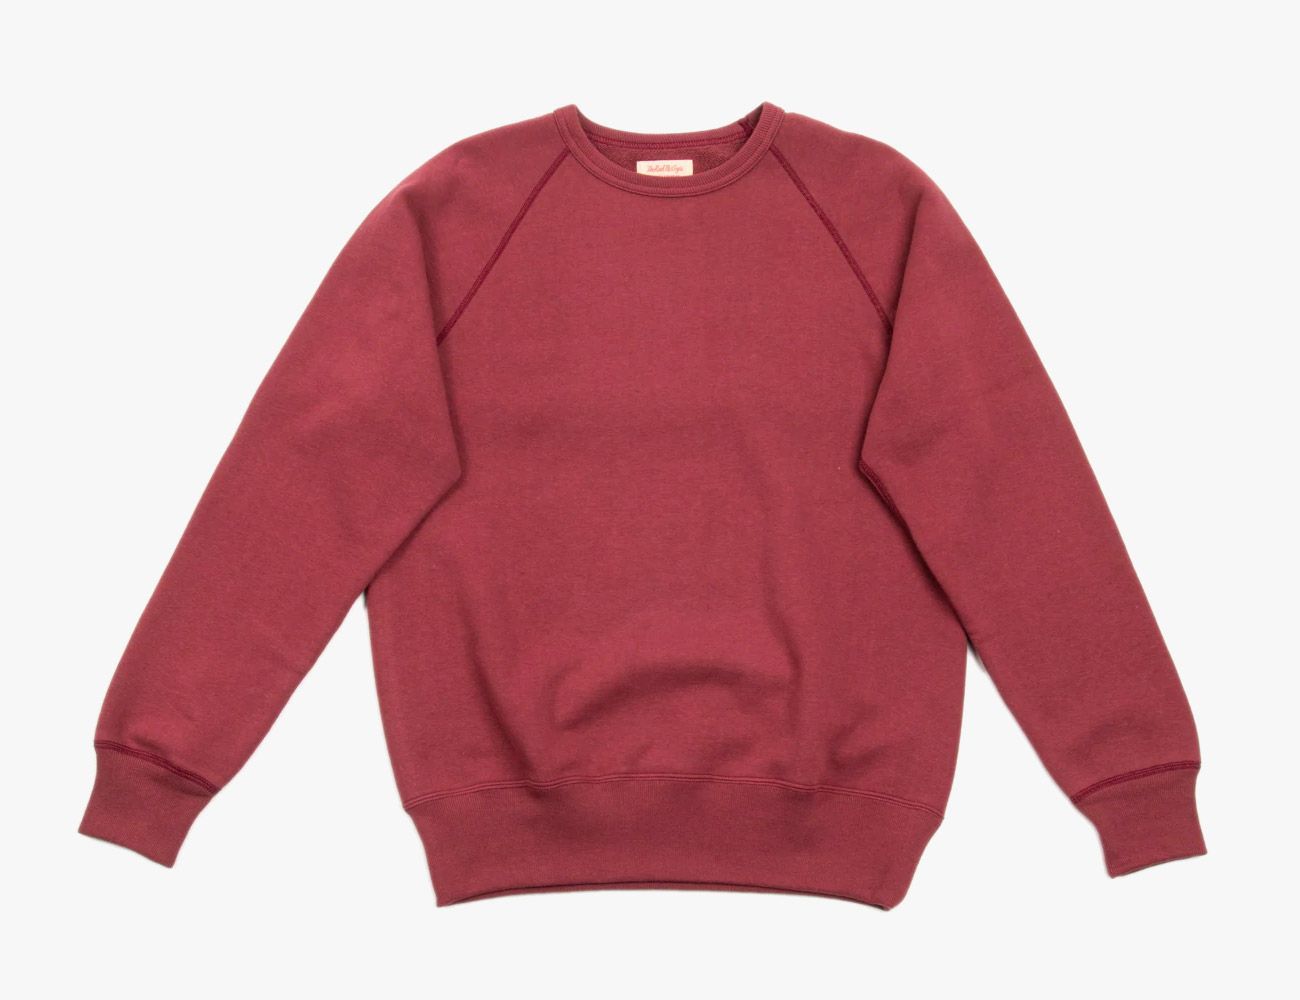 The Best Crewneck Sweatshirts for Your Classic, Casual Looks